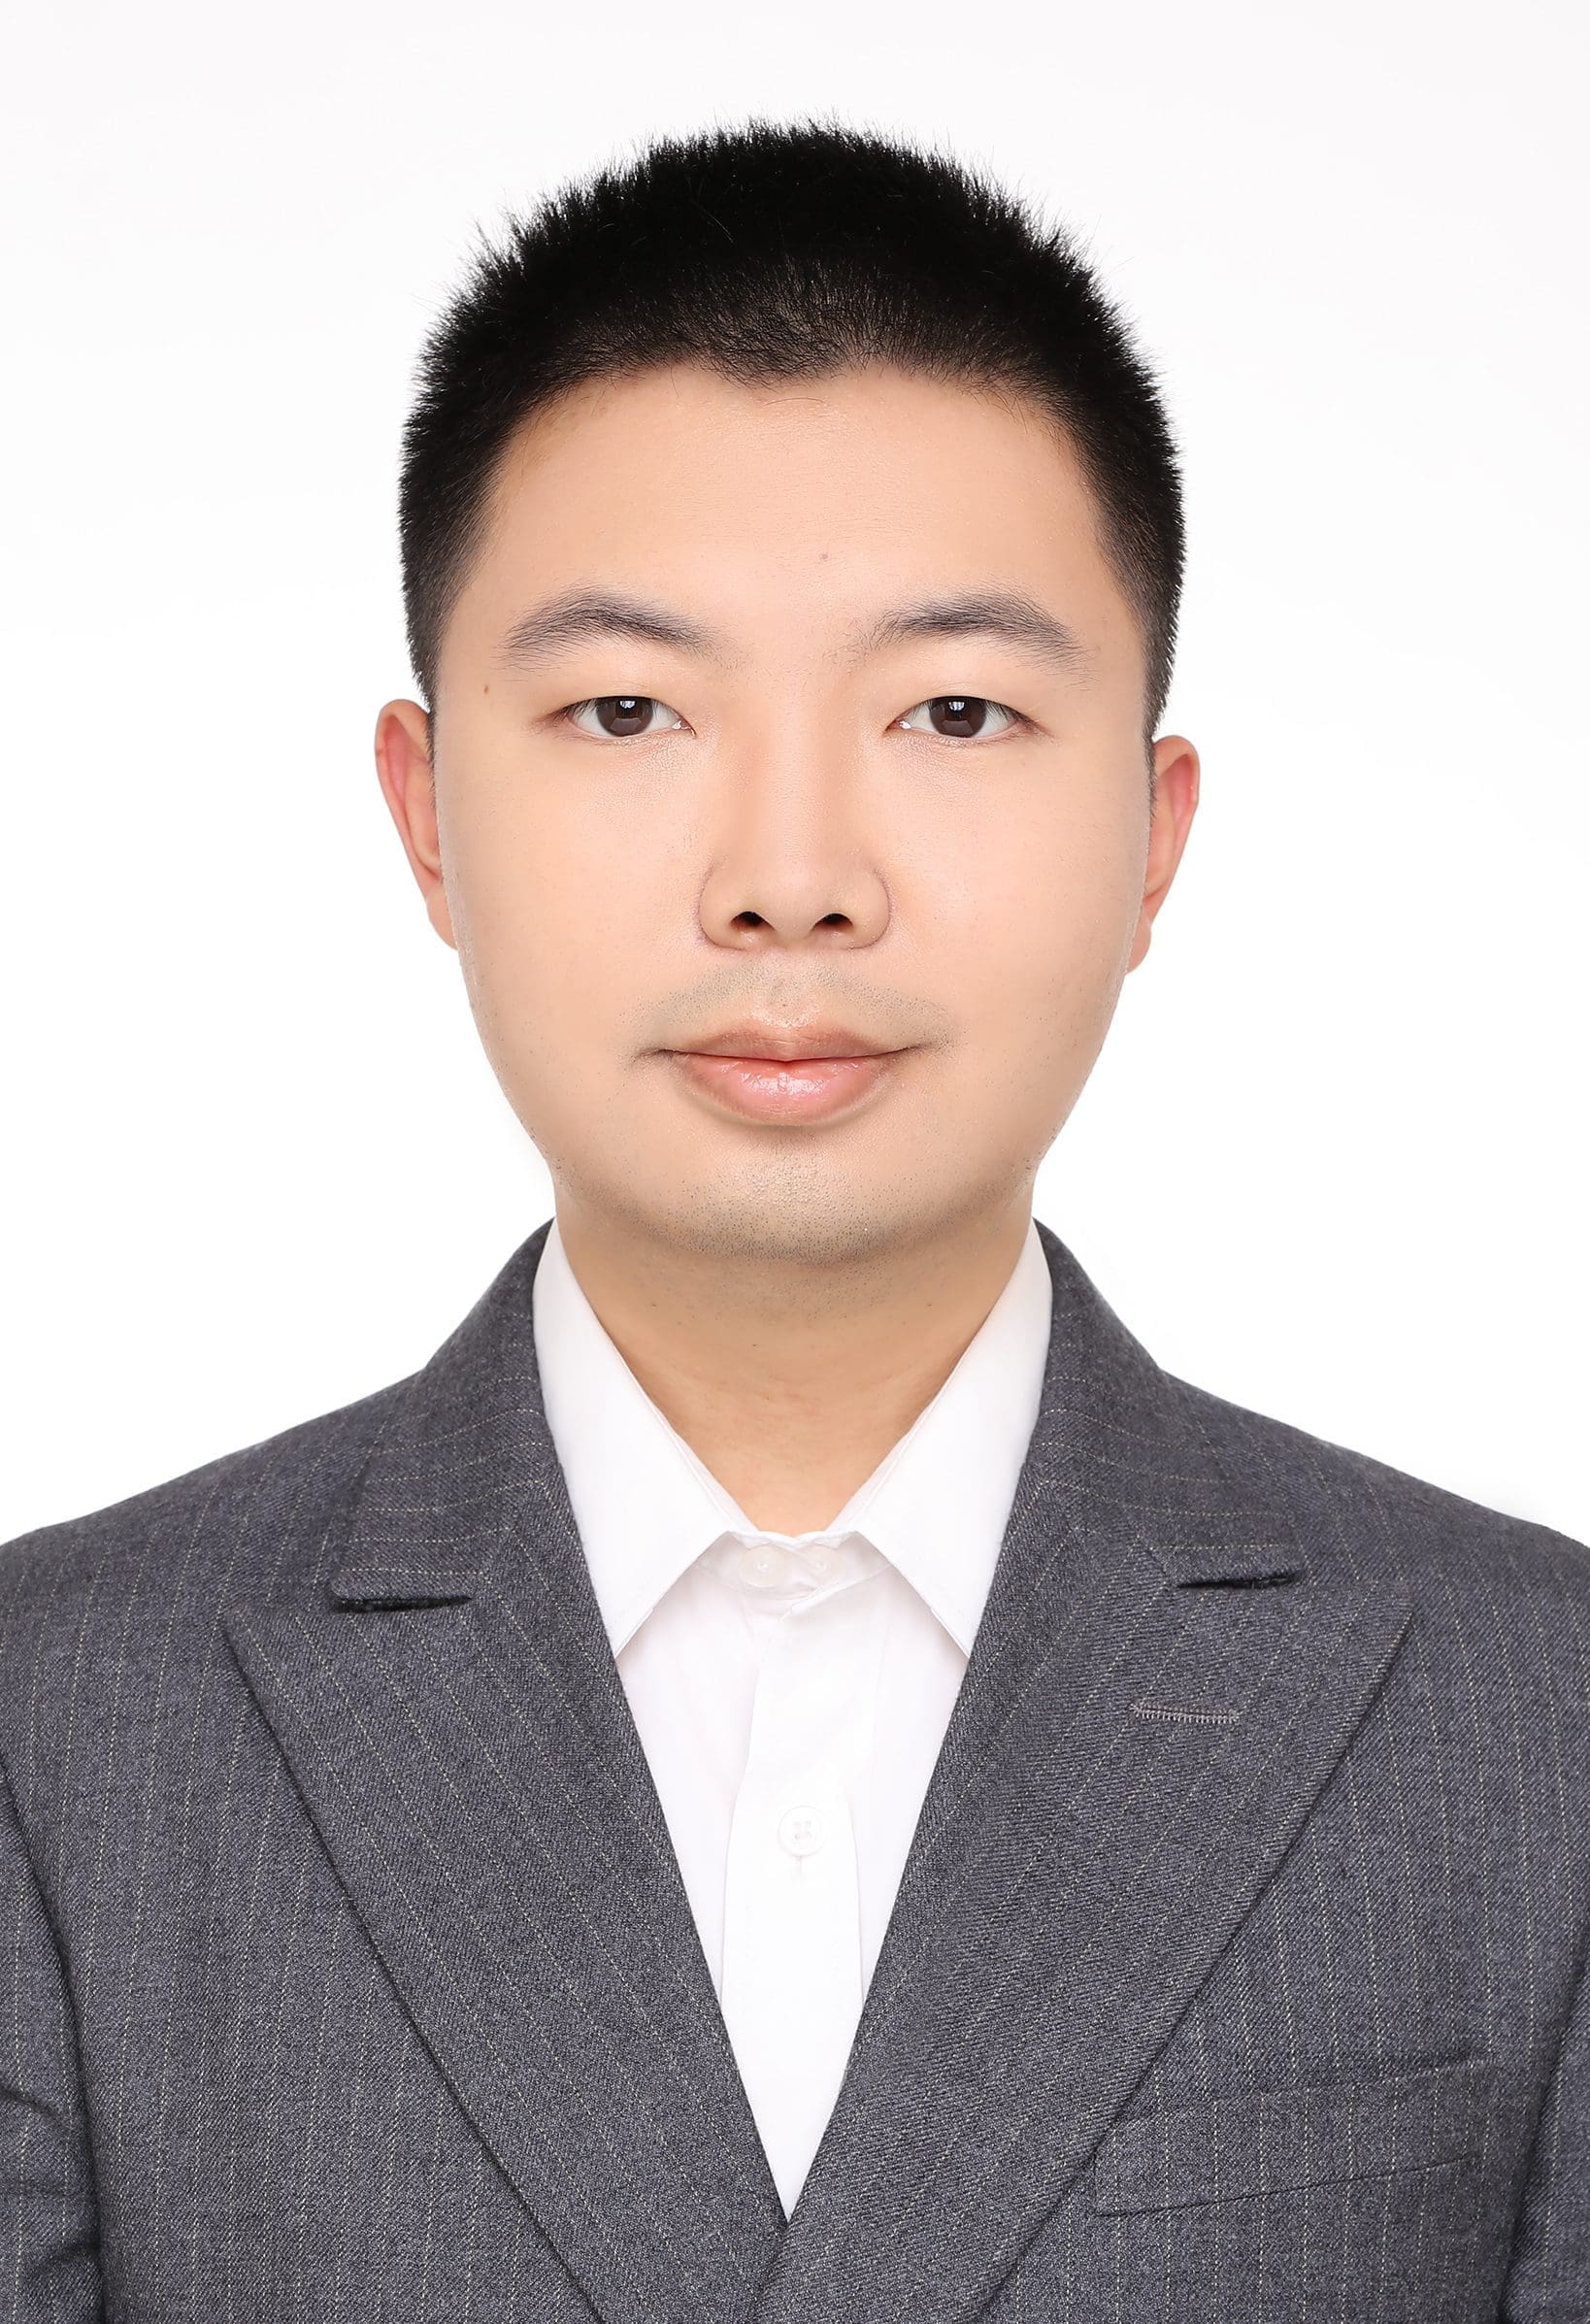 Graduate Student Qingyang Han has been awarded Provost’s office fellowship grant